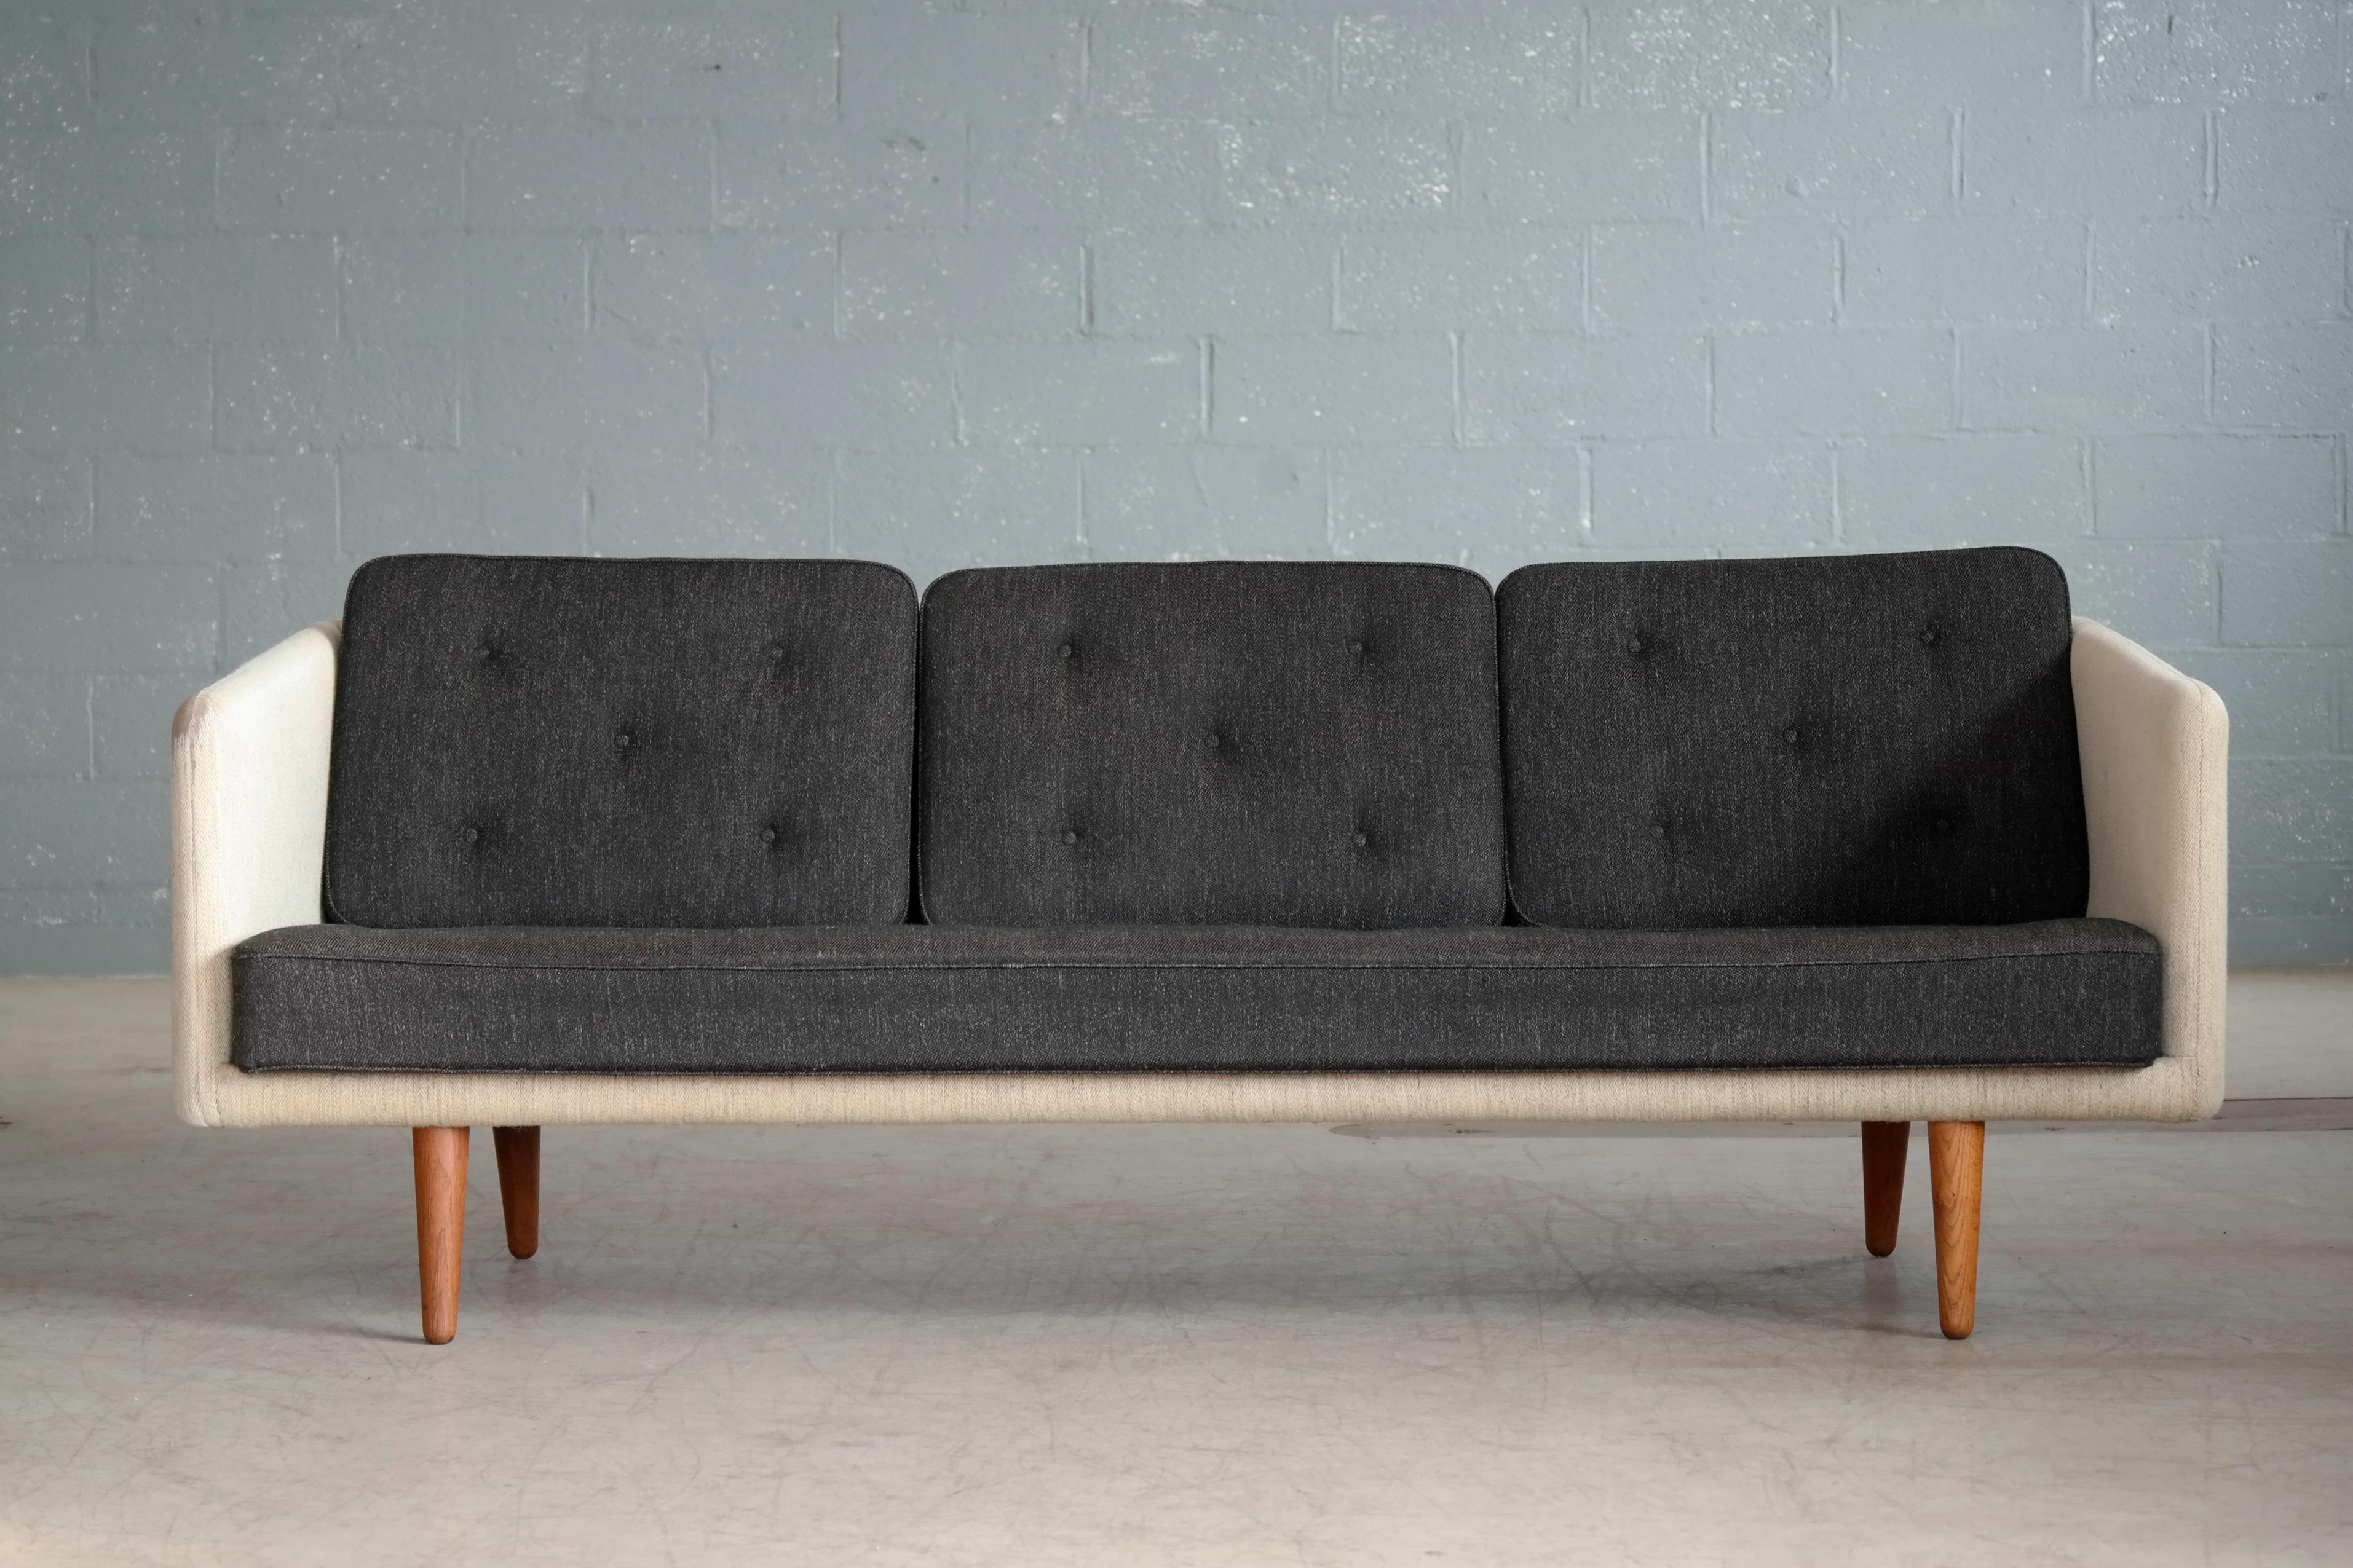 This fantastic sofa was designed by Borge Mogensen in 1955 as model 203 for Fredericia Stolefabrik and manufactured sometime between 1955 and 1960. In period fashion, Mogensen used loose cushions for this sofa, which would be precedent for his later